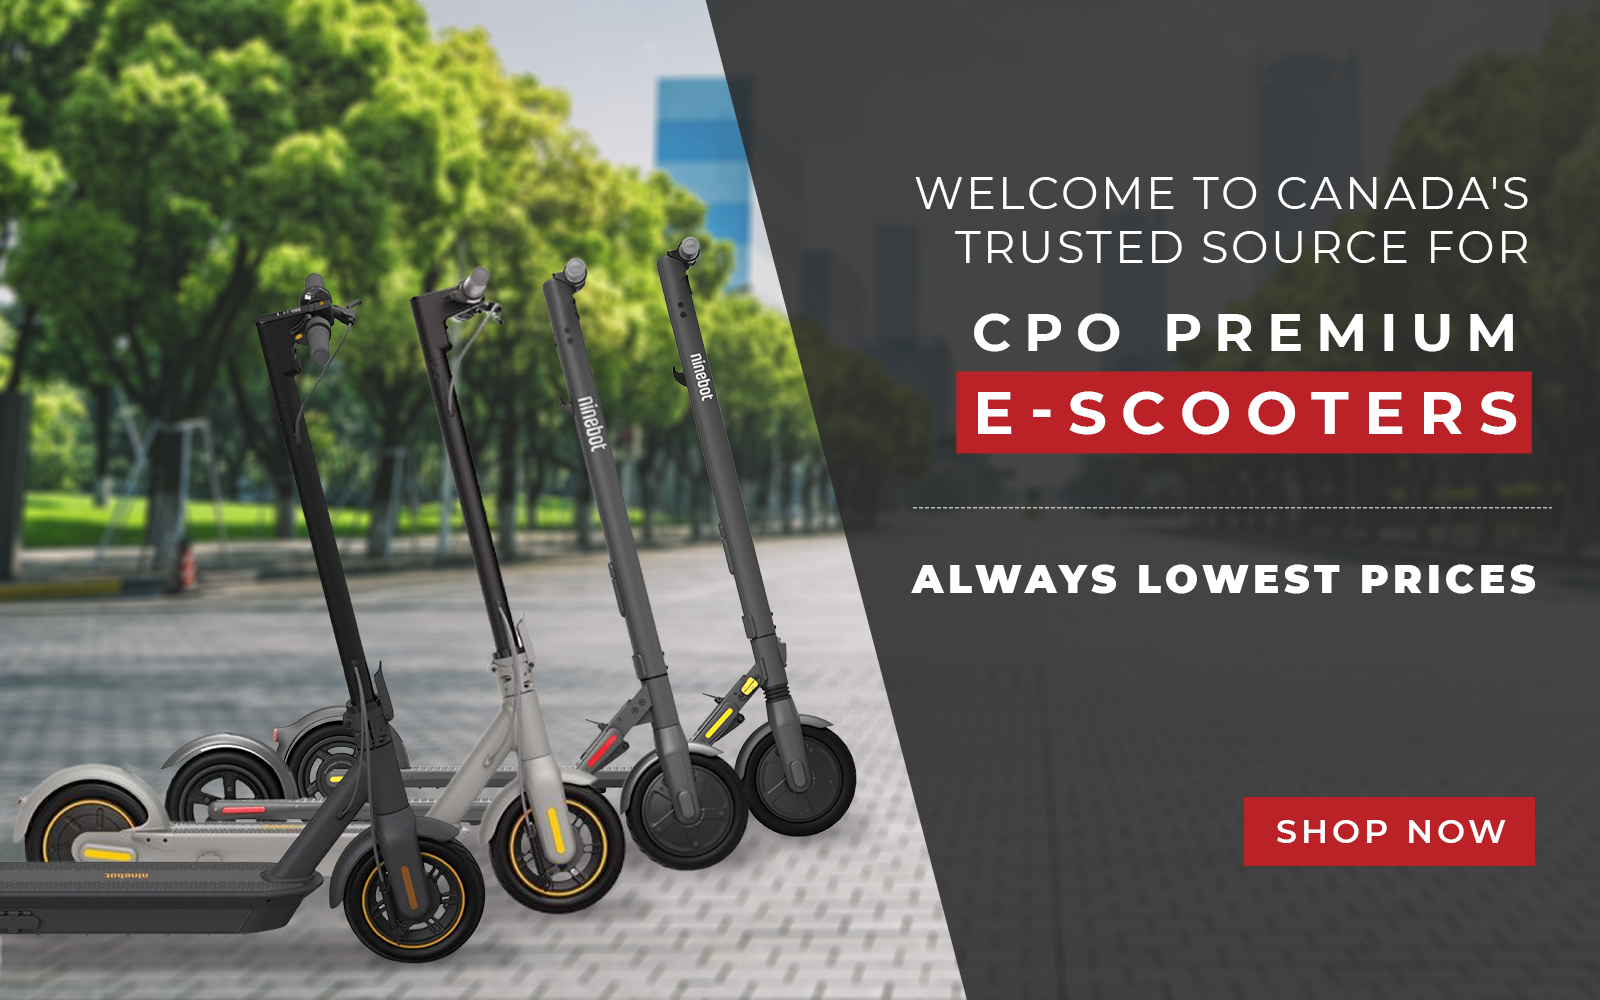 Buy Electric Scooters $449.00 | Warranty & Fast Shipping